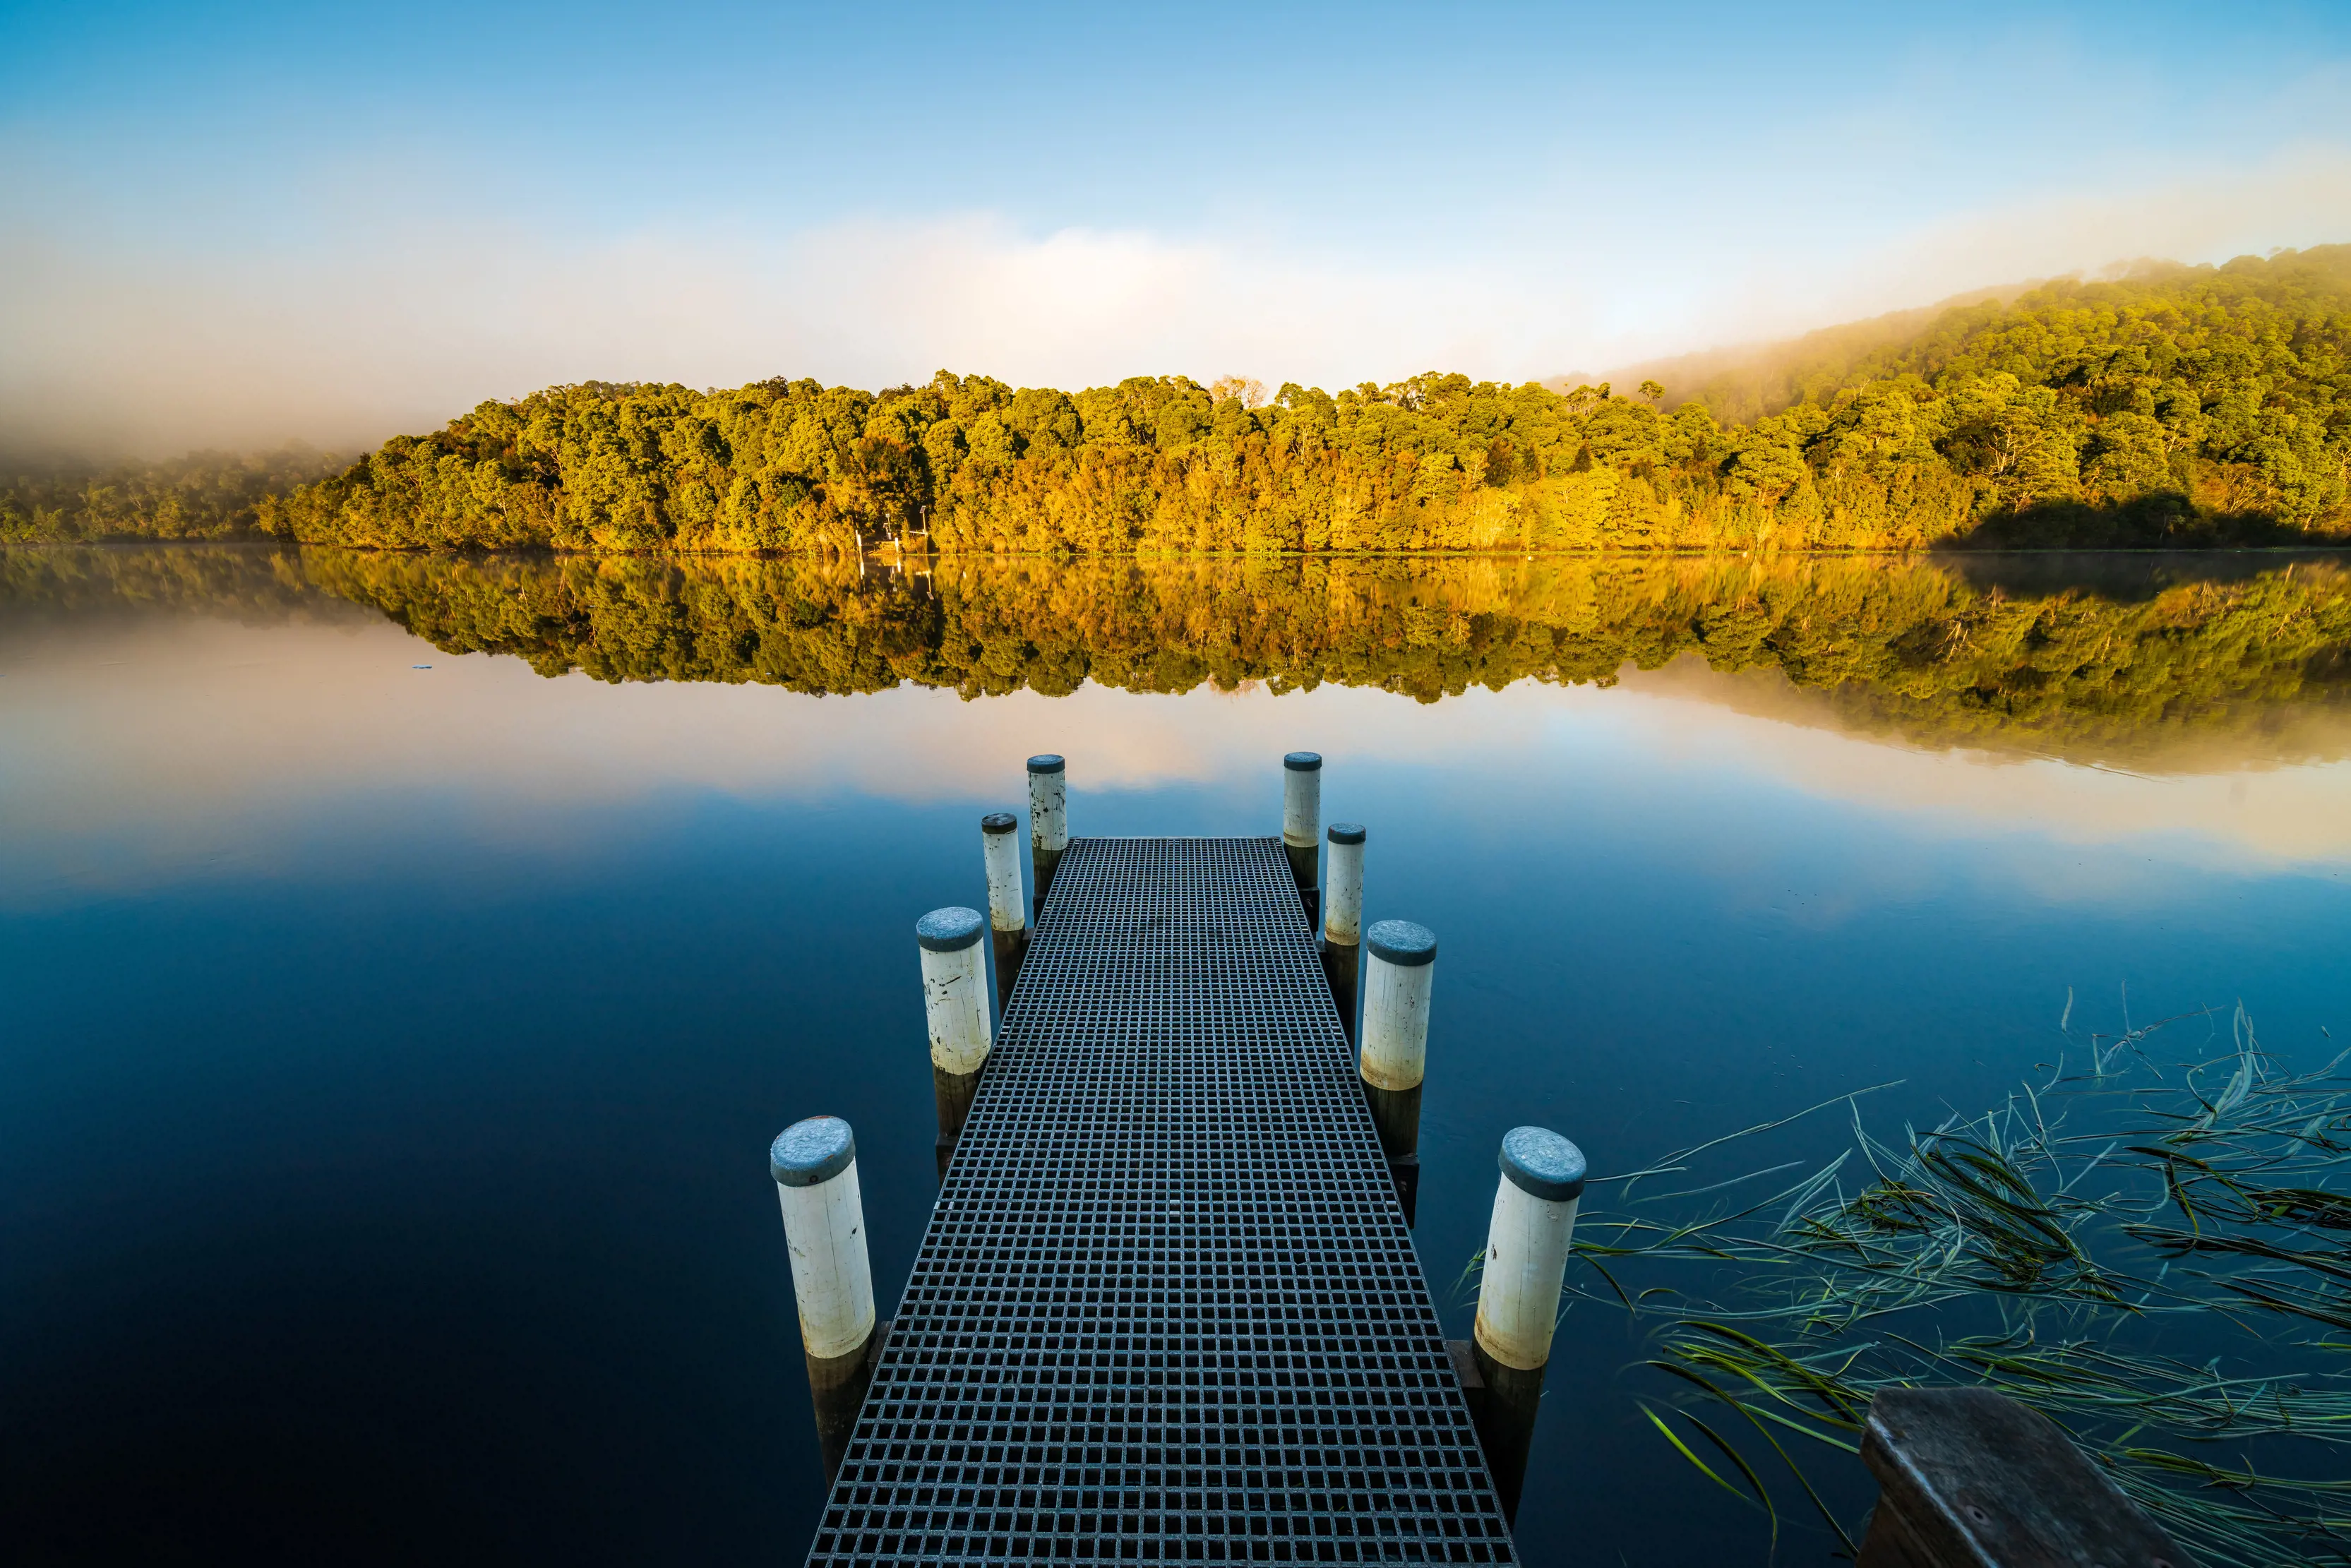 Image of a jetty, floating on the Pieman River.